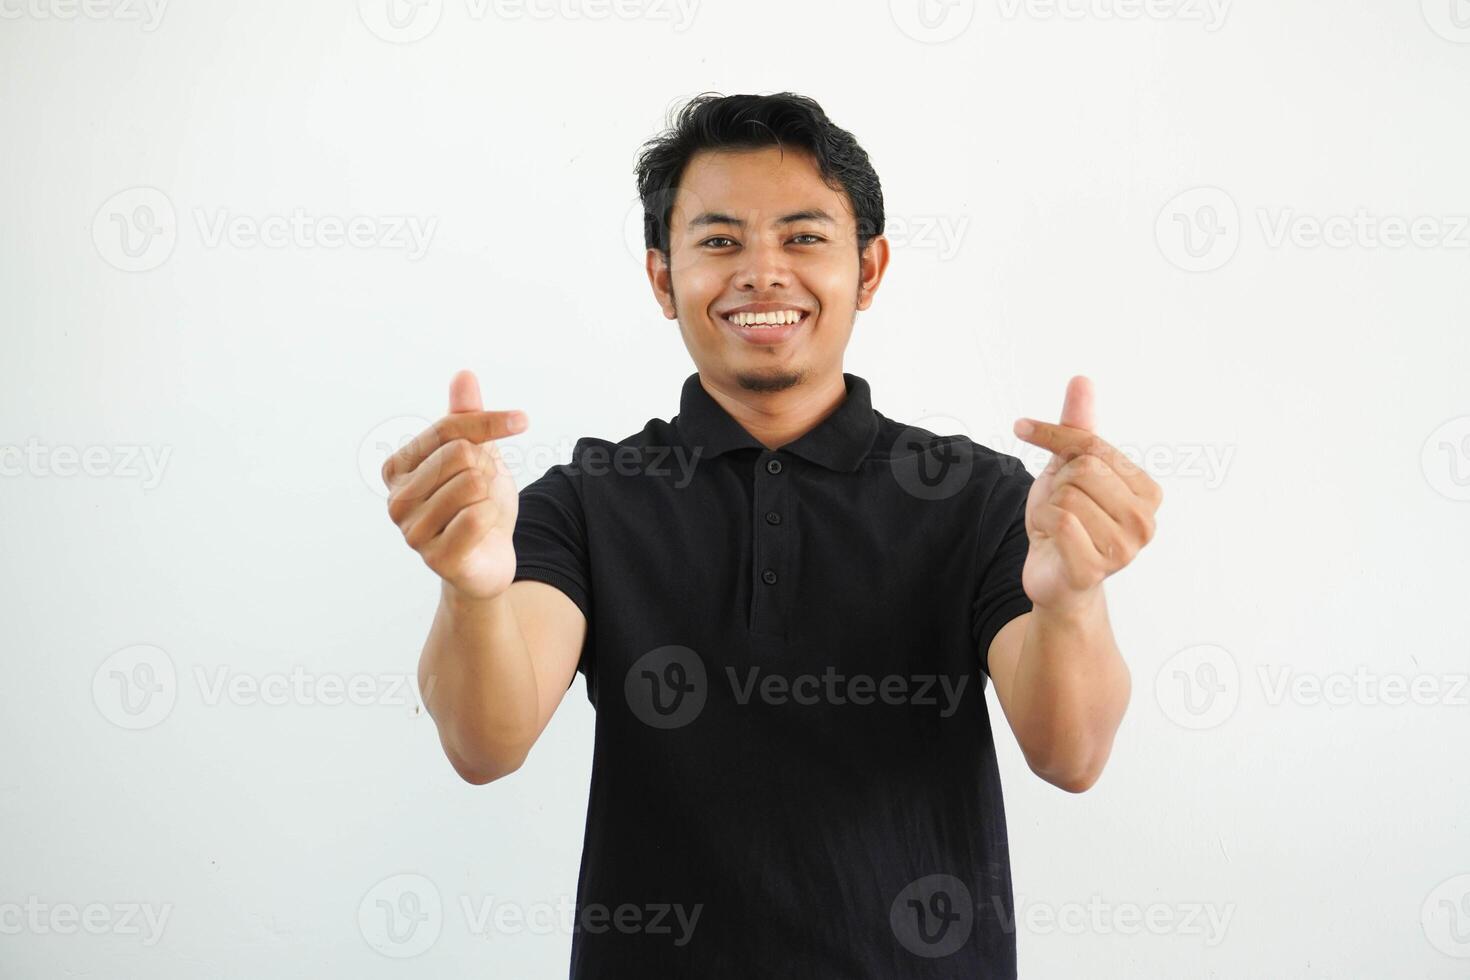 smiling or happy asian man showing gesture heart shape hands or crossing his index finger and thumb the symbol saranghae, sarangheo, saranghaeo wearing black polo t shirt isolated photo